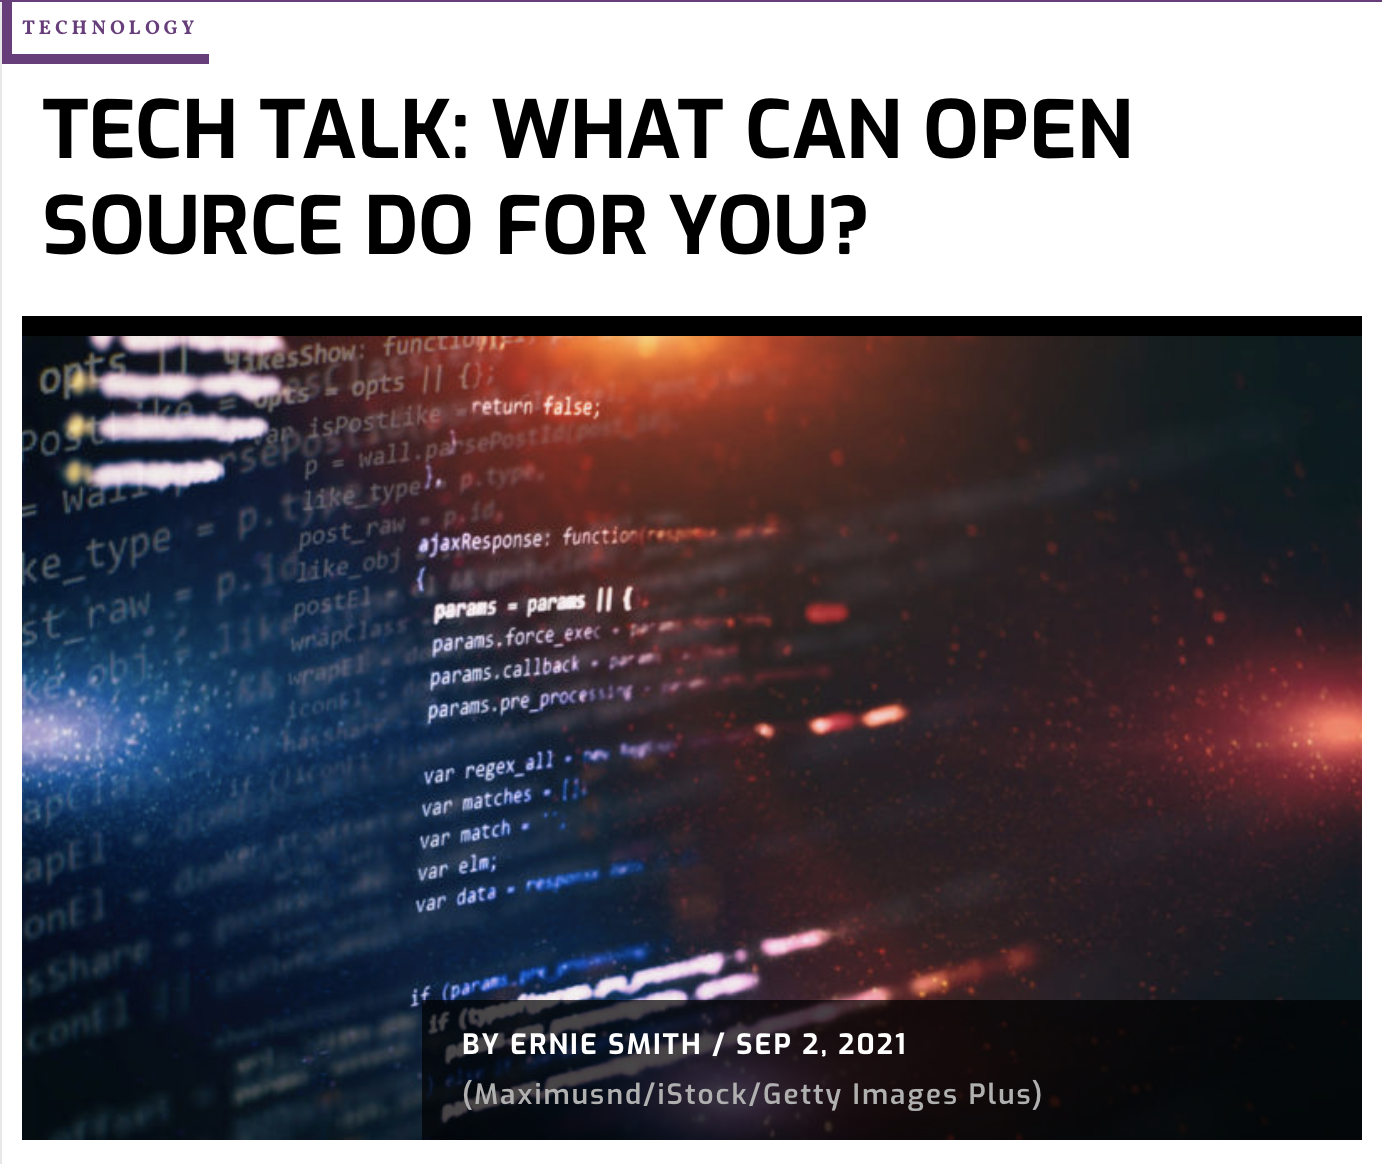 As featured in Associations Now - Tech Talk: What Can Open Source Do For You